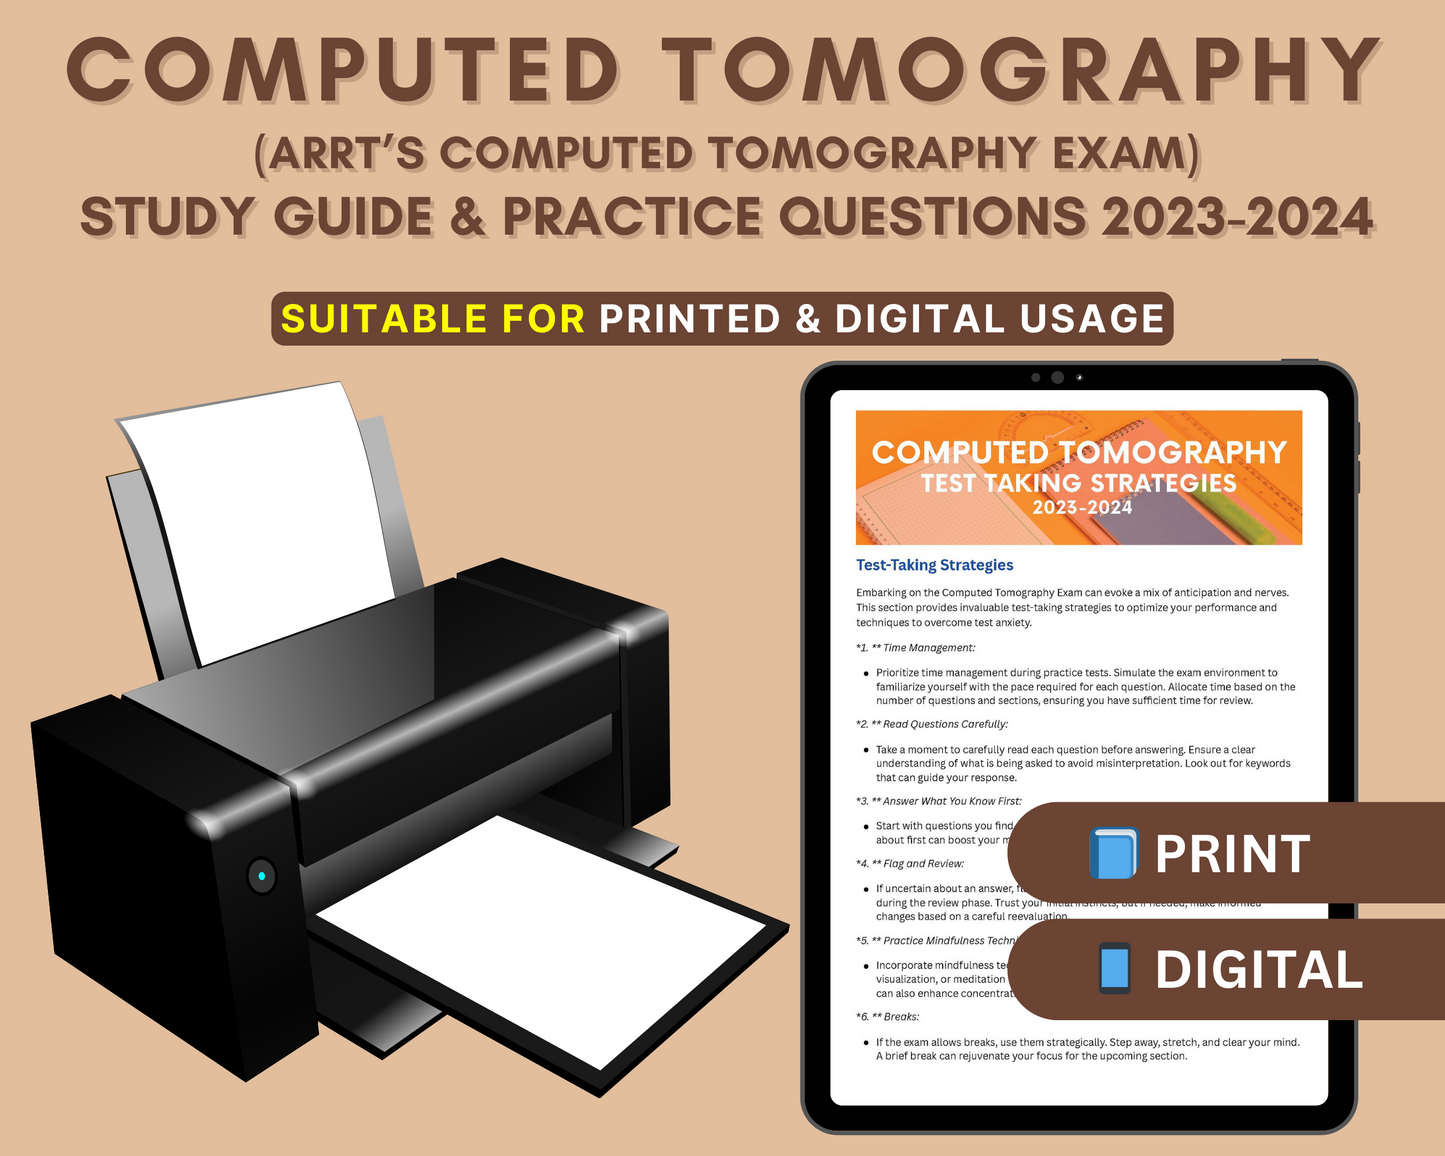 Computed Tomography Exam Study Guide 2023-2024: In-Depth Content Review, Practice Tests for Radiologic Excellence!